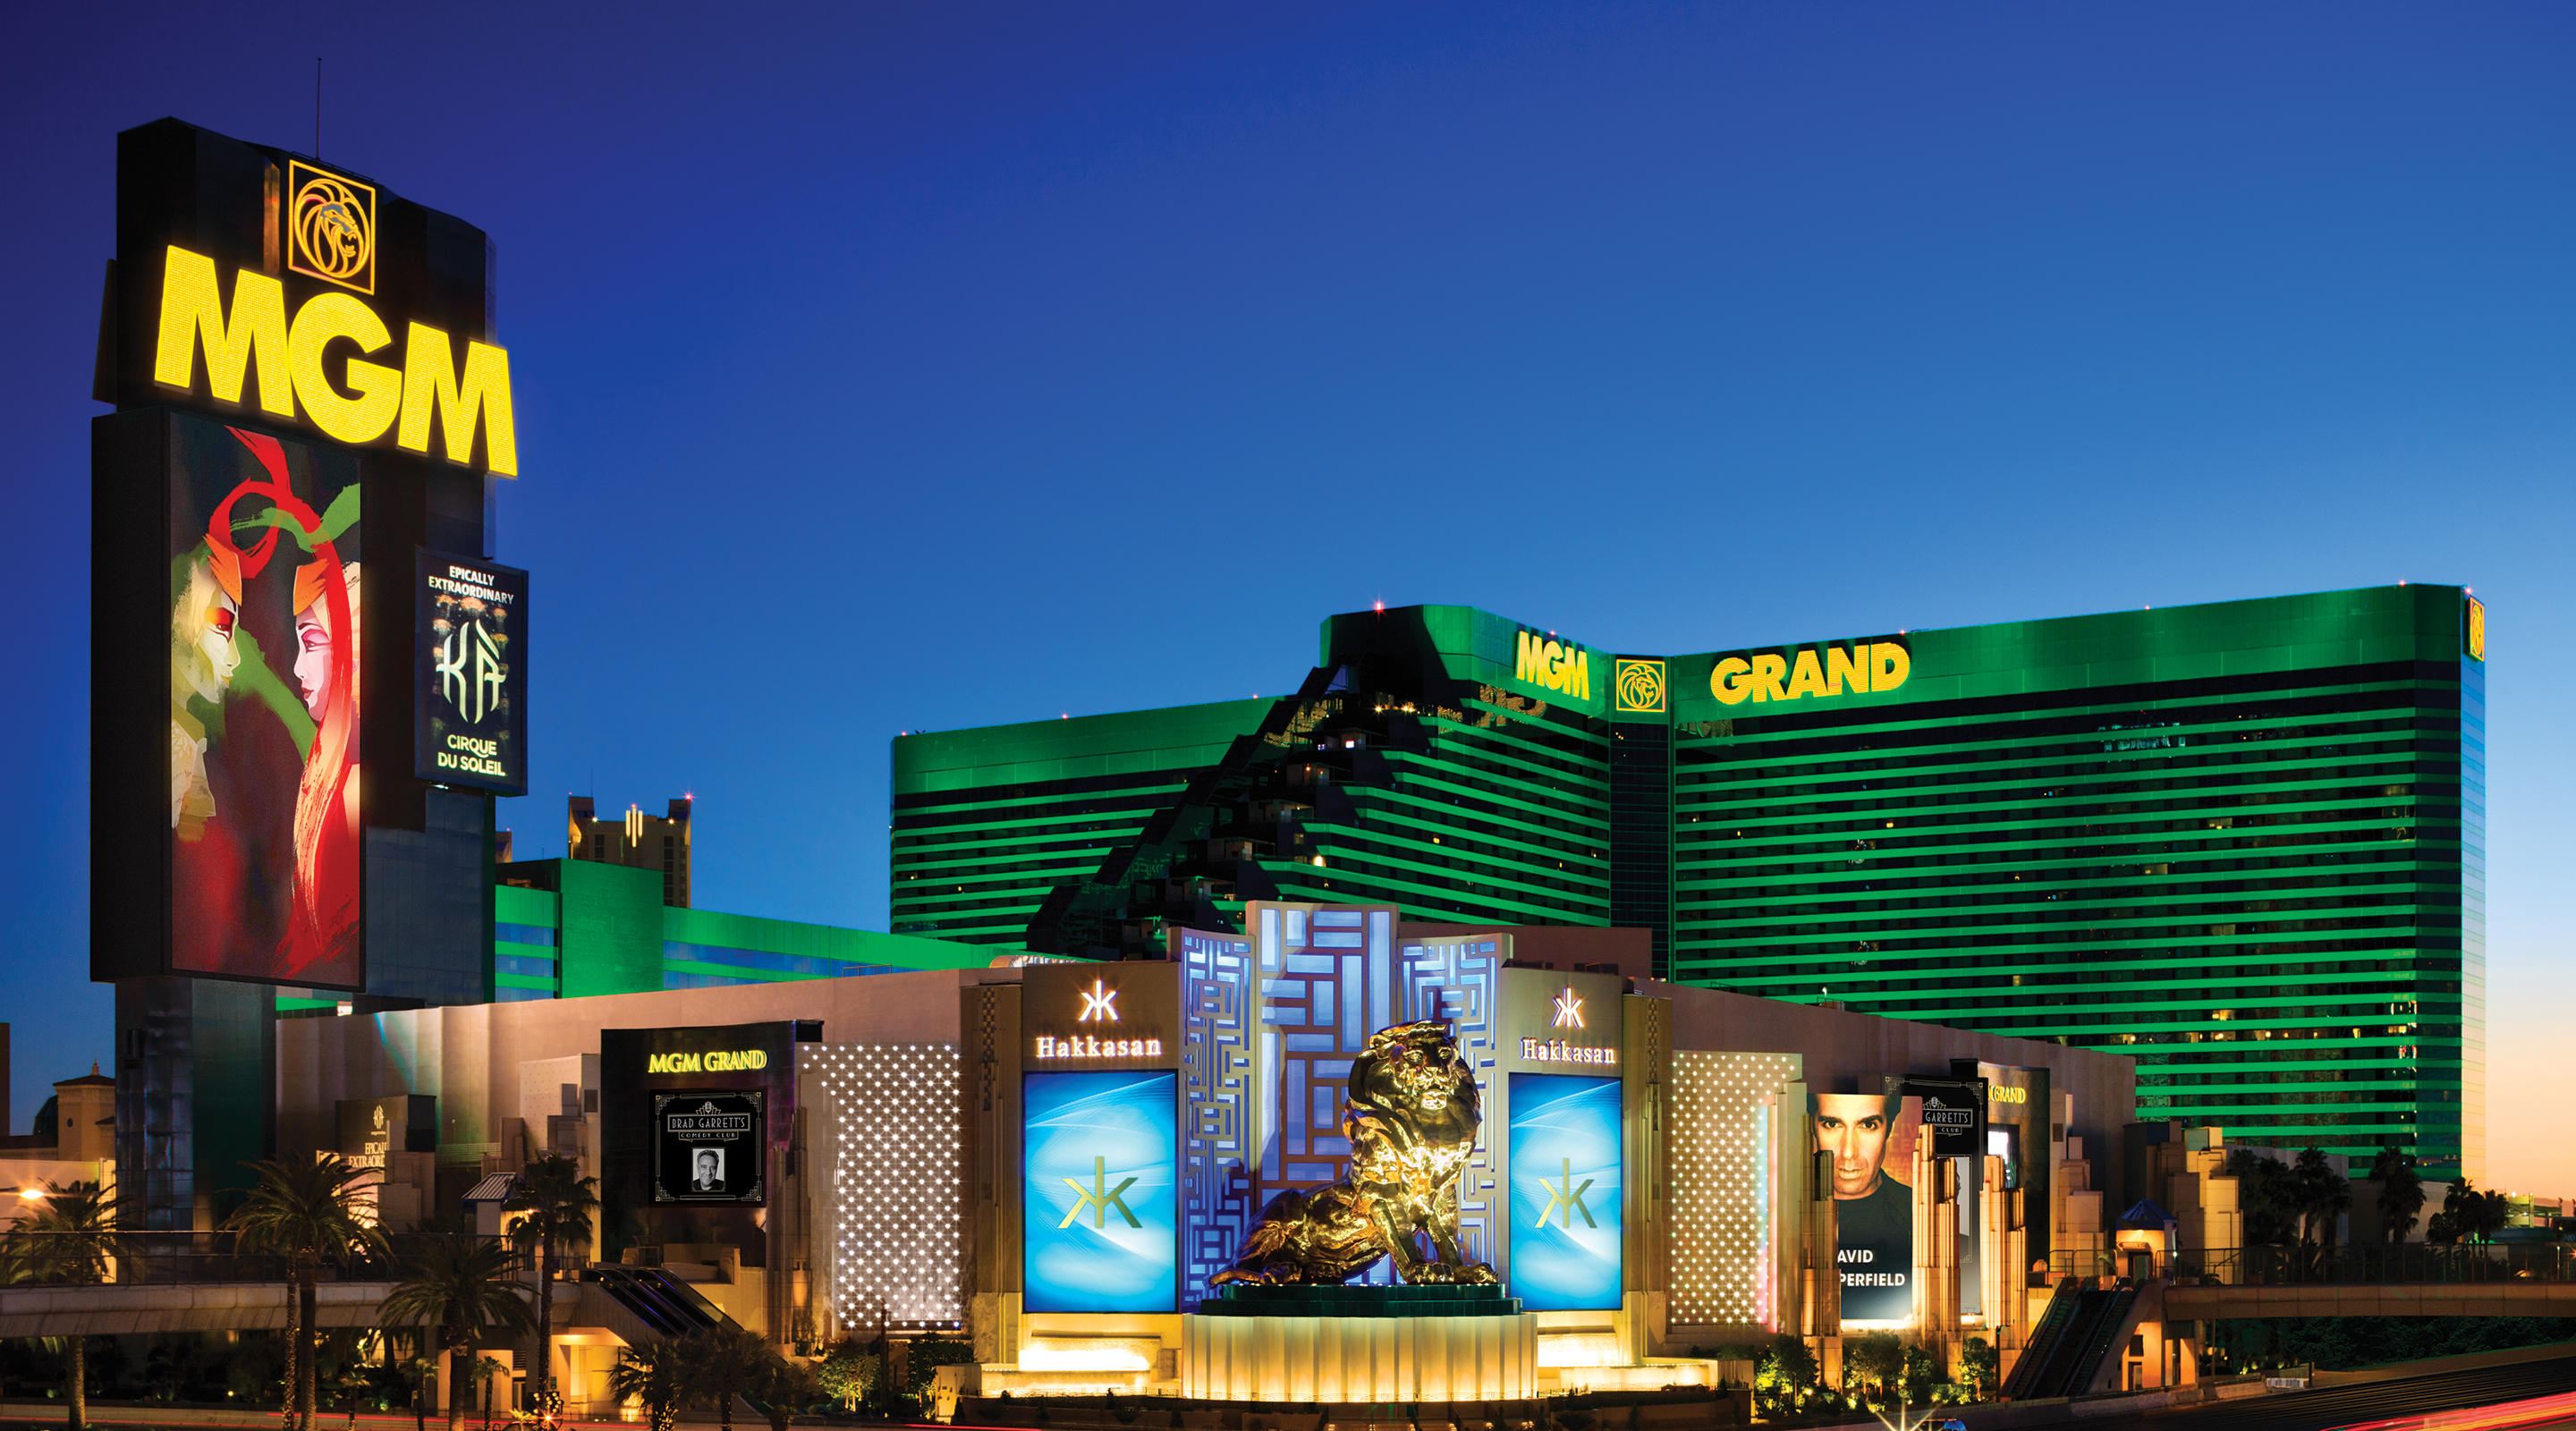 The Mgm Grand